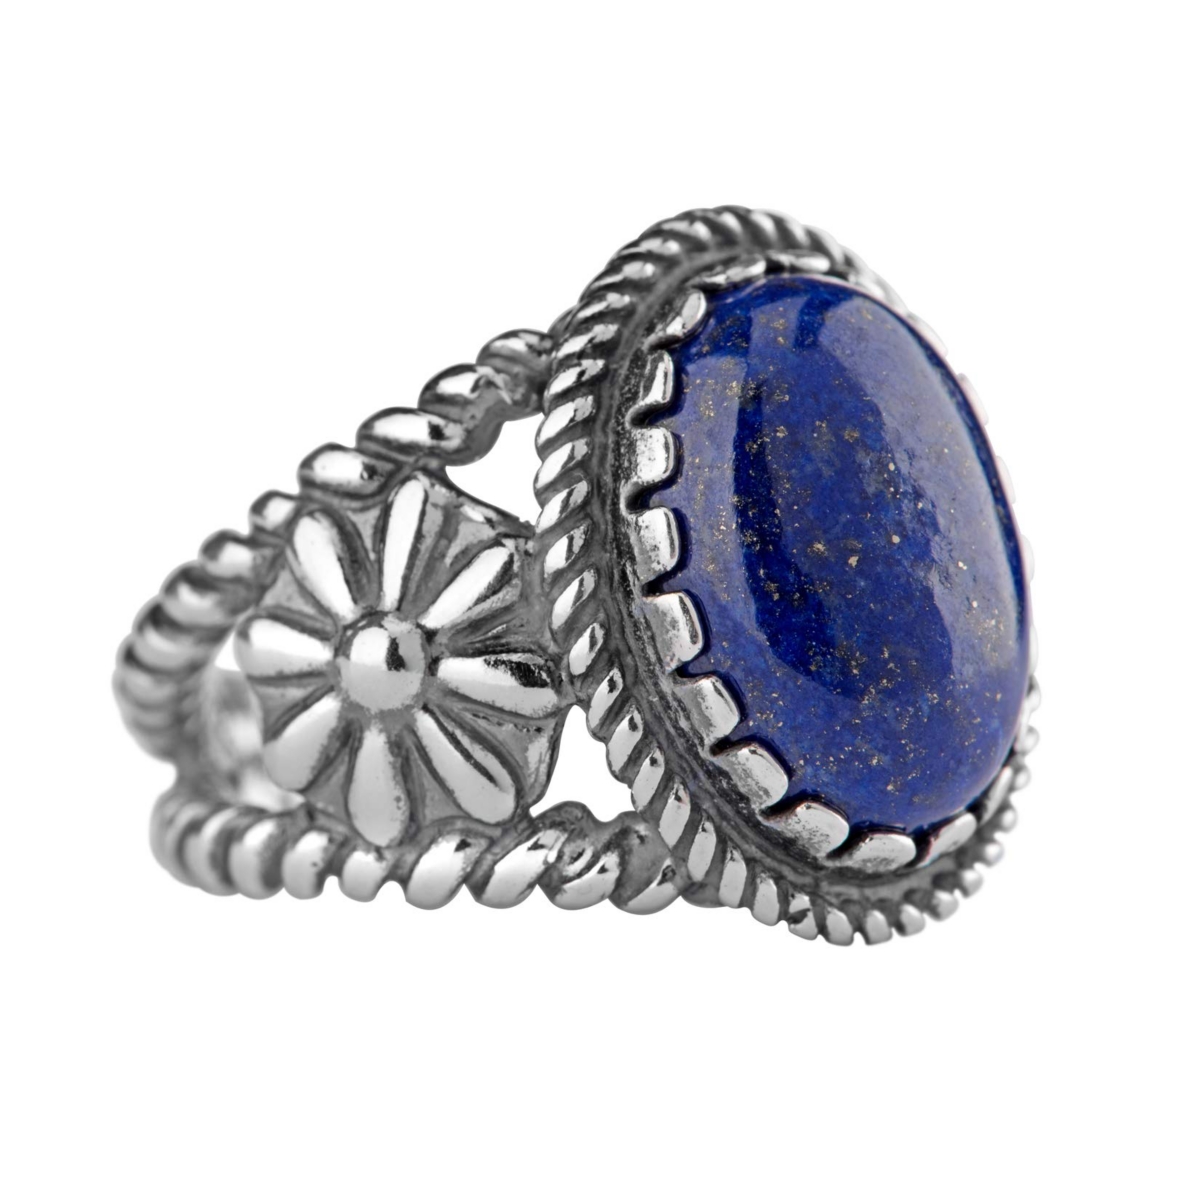 Southwestern Wildflower Ring-Crafted from Sterling Silver and Genuine Gemstones, Sizes 5-10 - Phosphosiderite